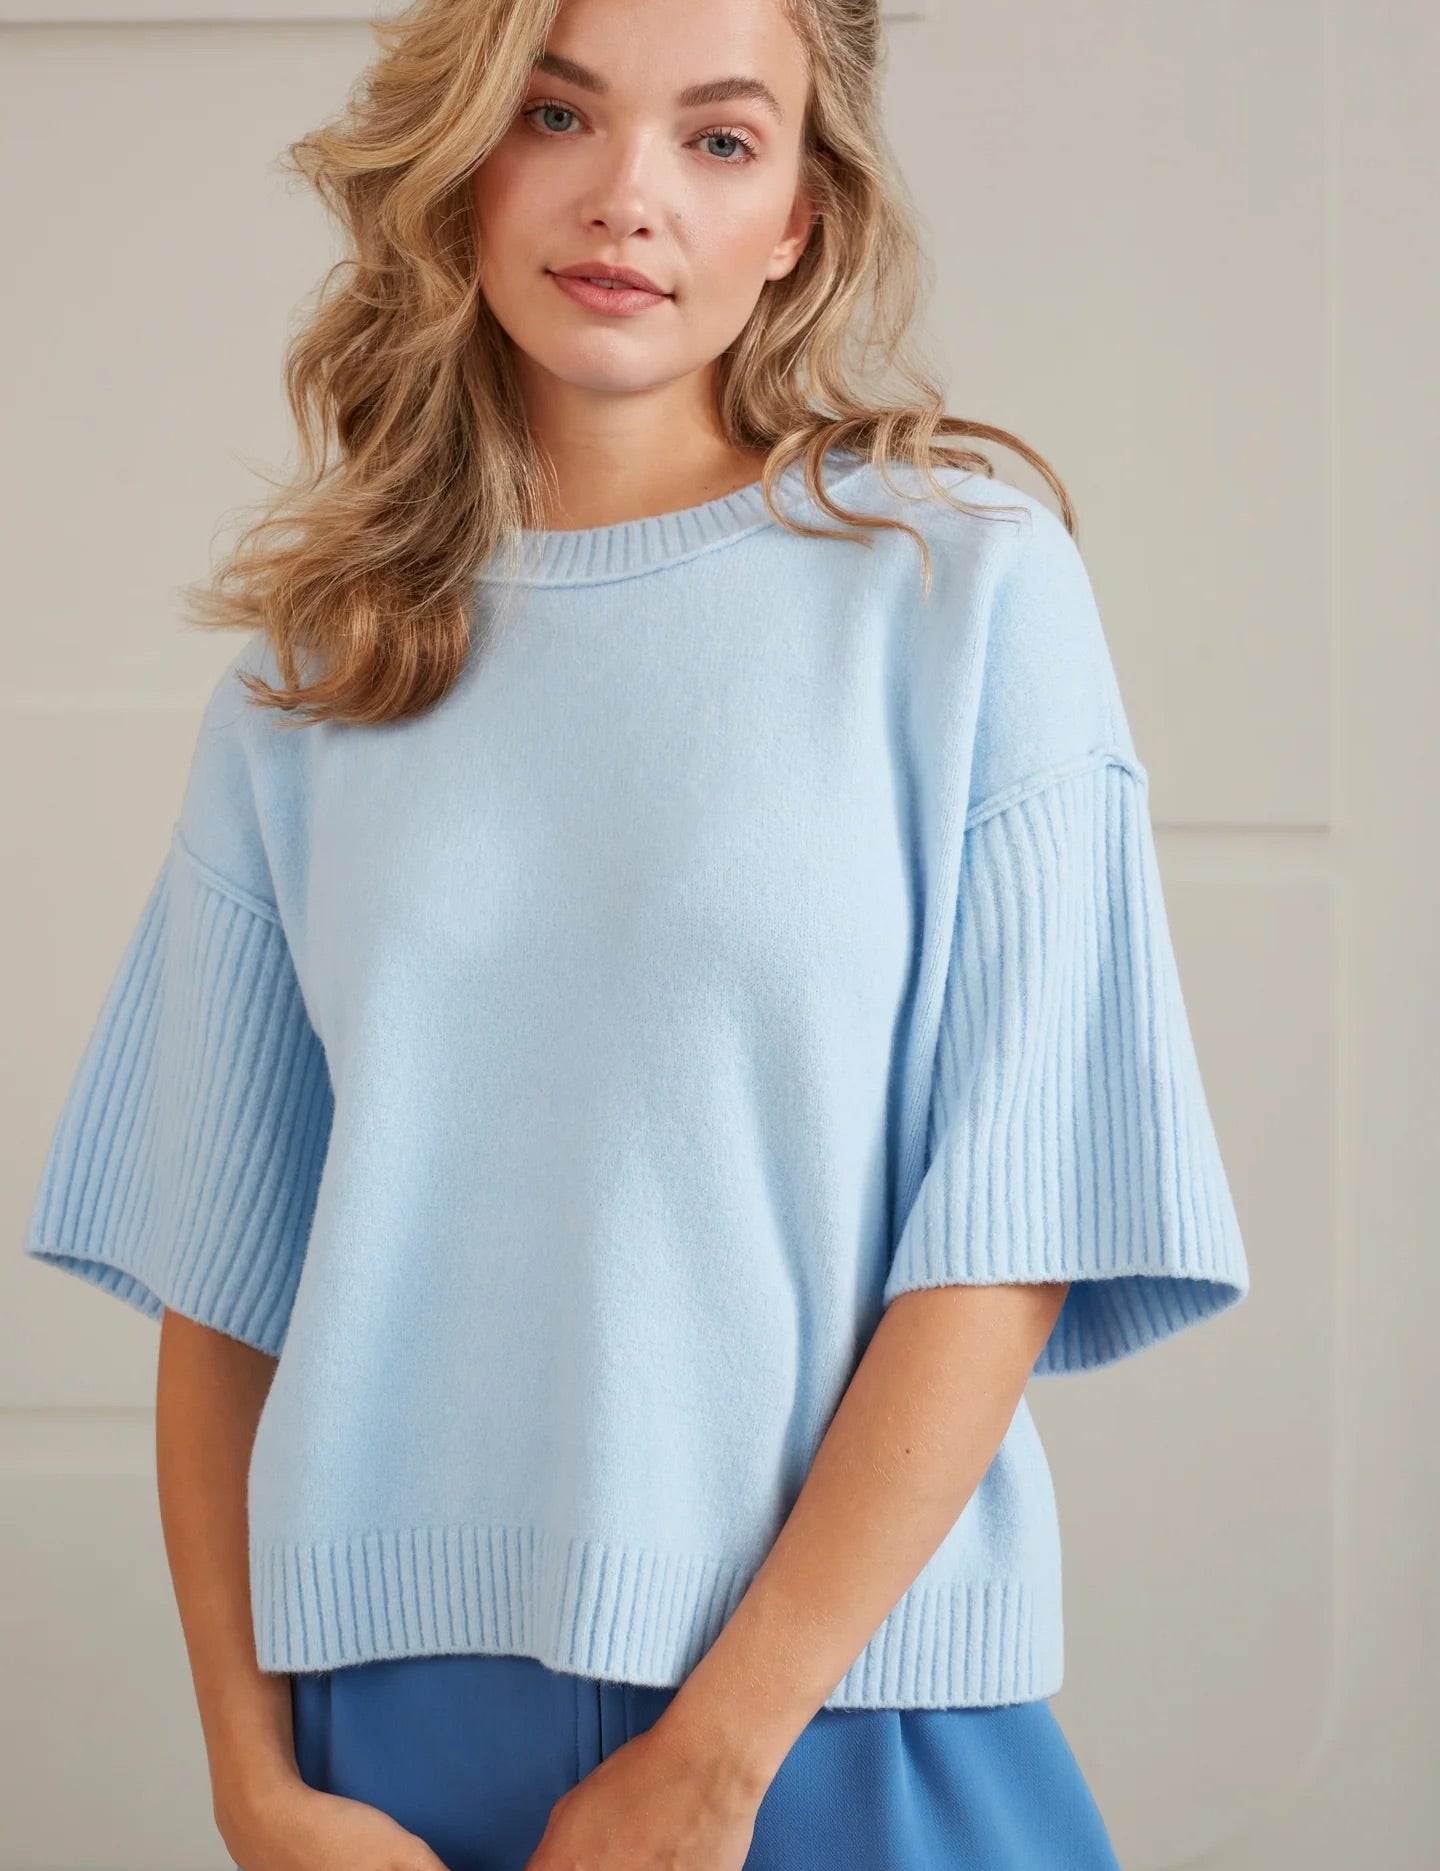 sweater-with-boatneck-wide-half-long-sleeves-in-boxy-fit-cerulean-blue_239c2661-2006-4e82-aec3-e93d4e6472df_2880x_jpg.jpg